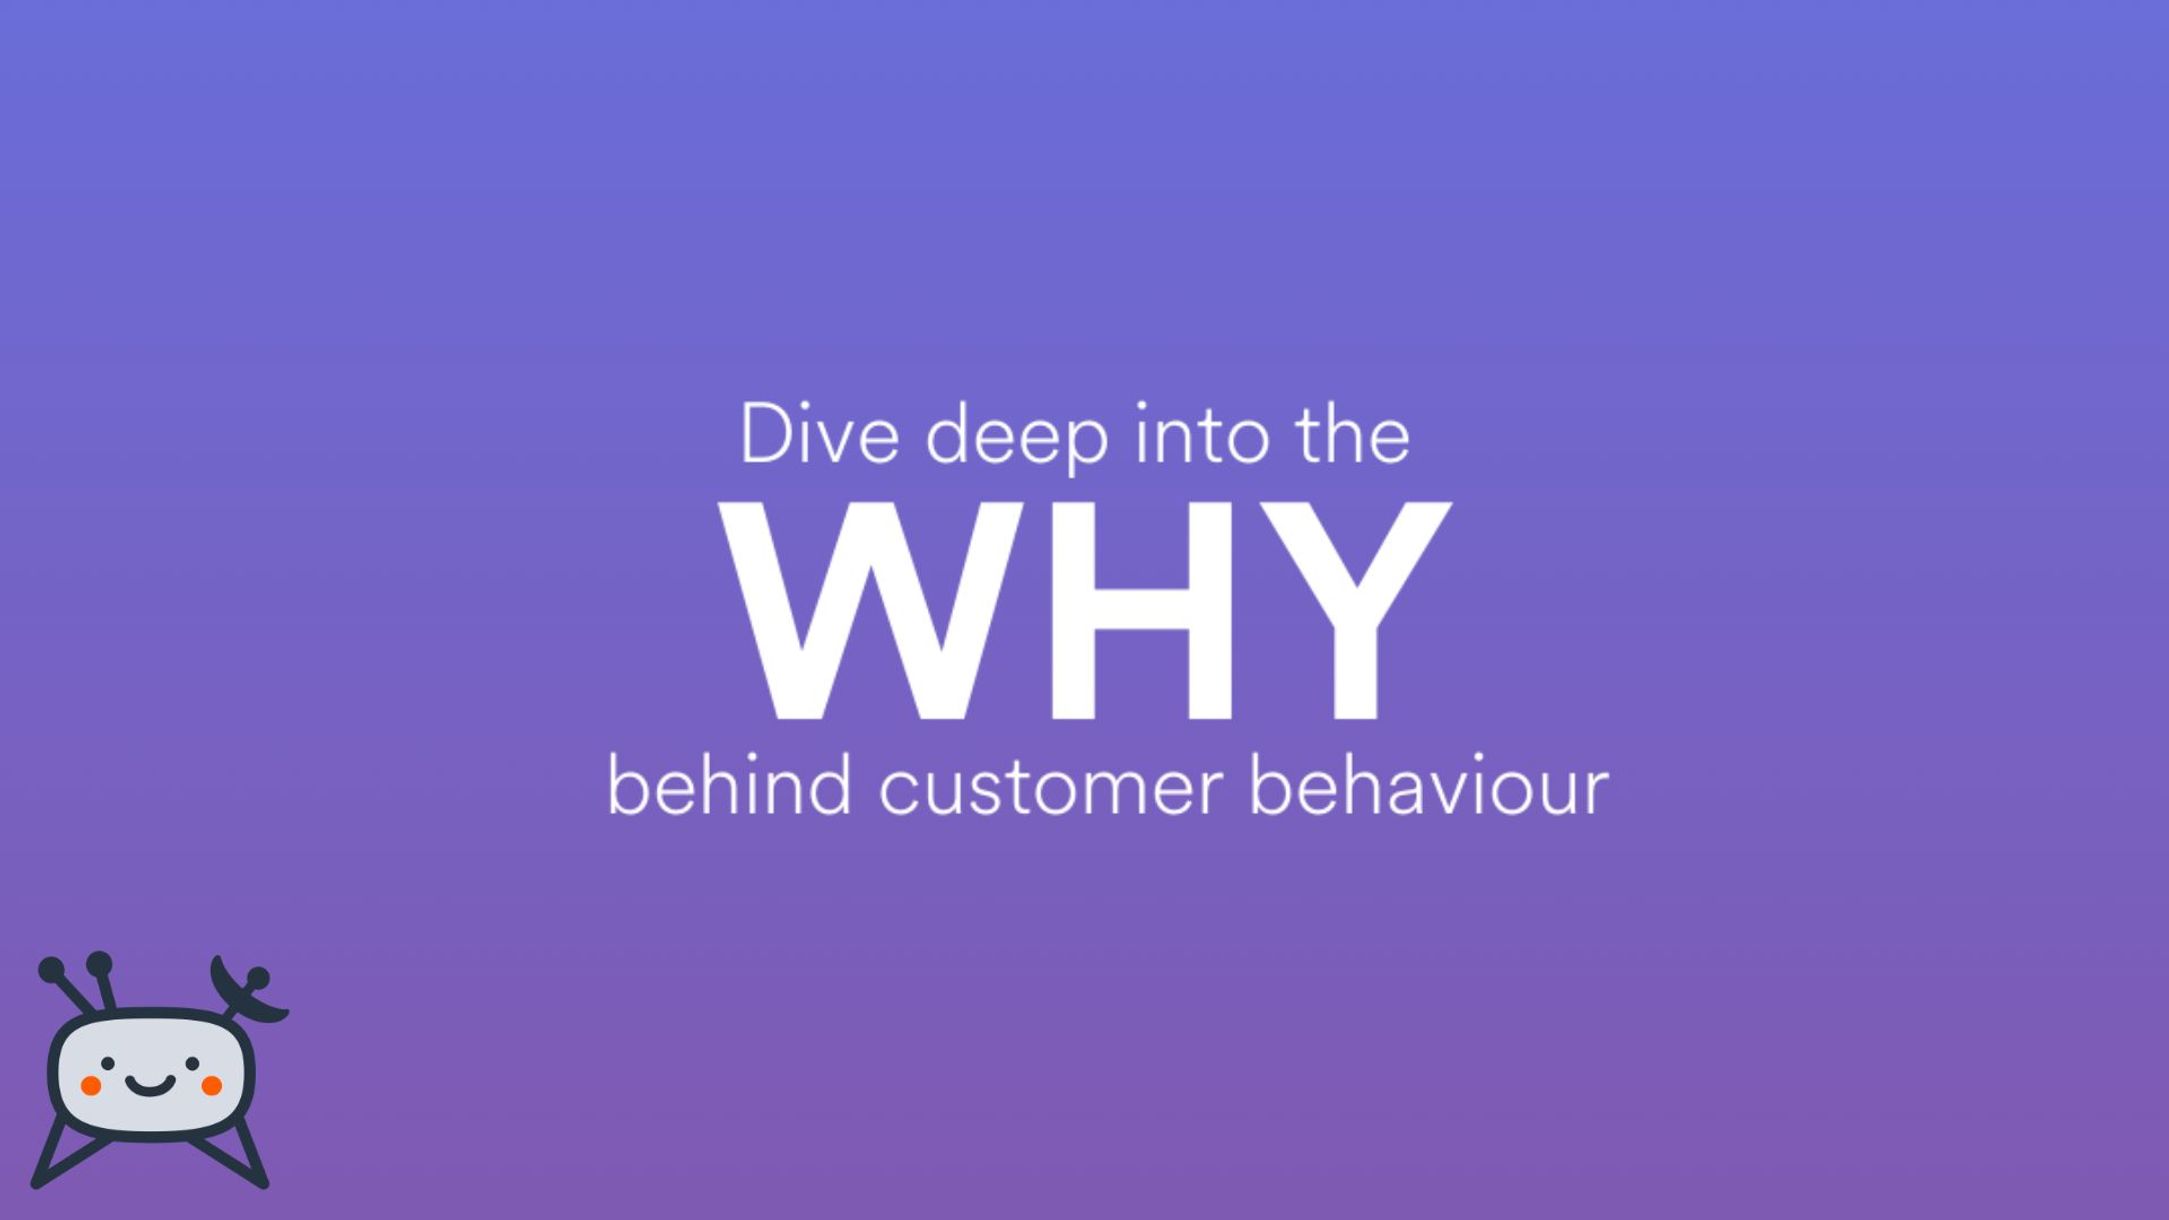 Deep dive into the why behind customer behaviour